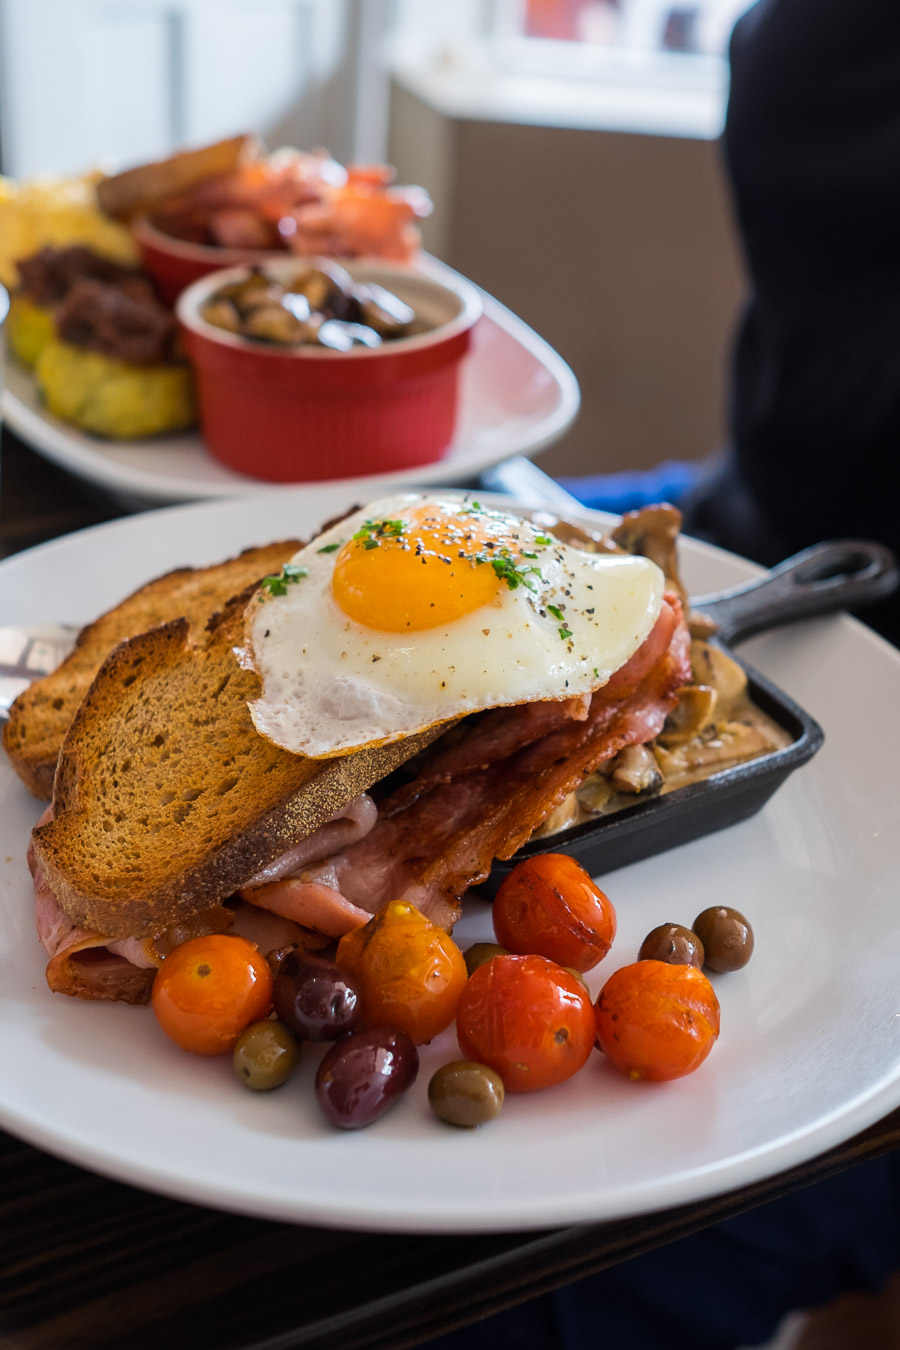 Creamed mushrooms with sunny side egg, bacon, roasted cherry tomatoes, olives and rye toast (AU$18.50)